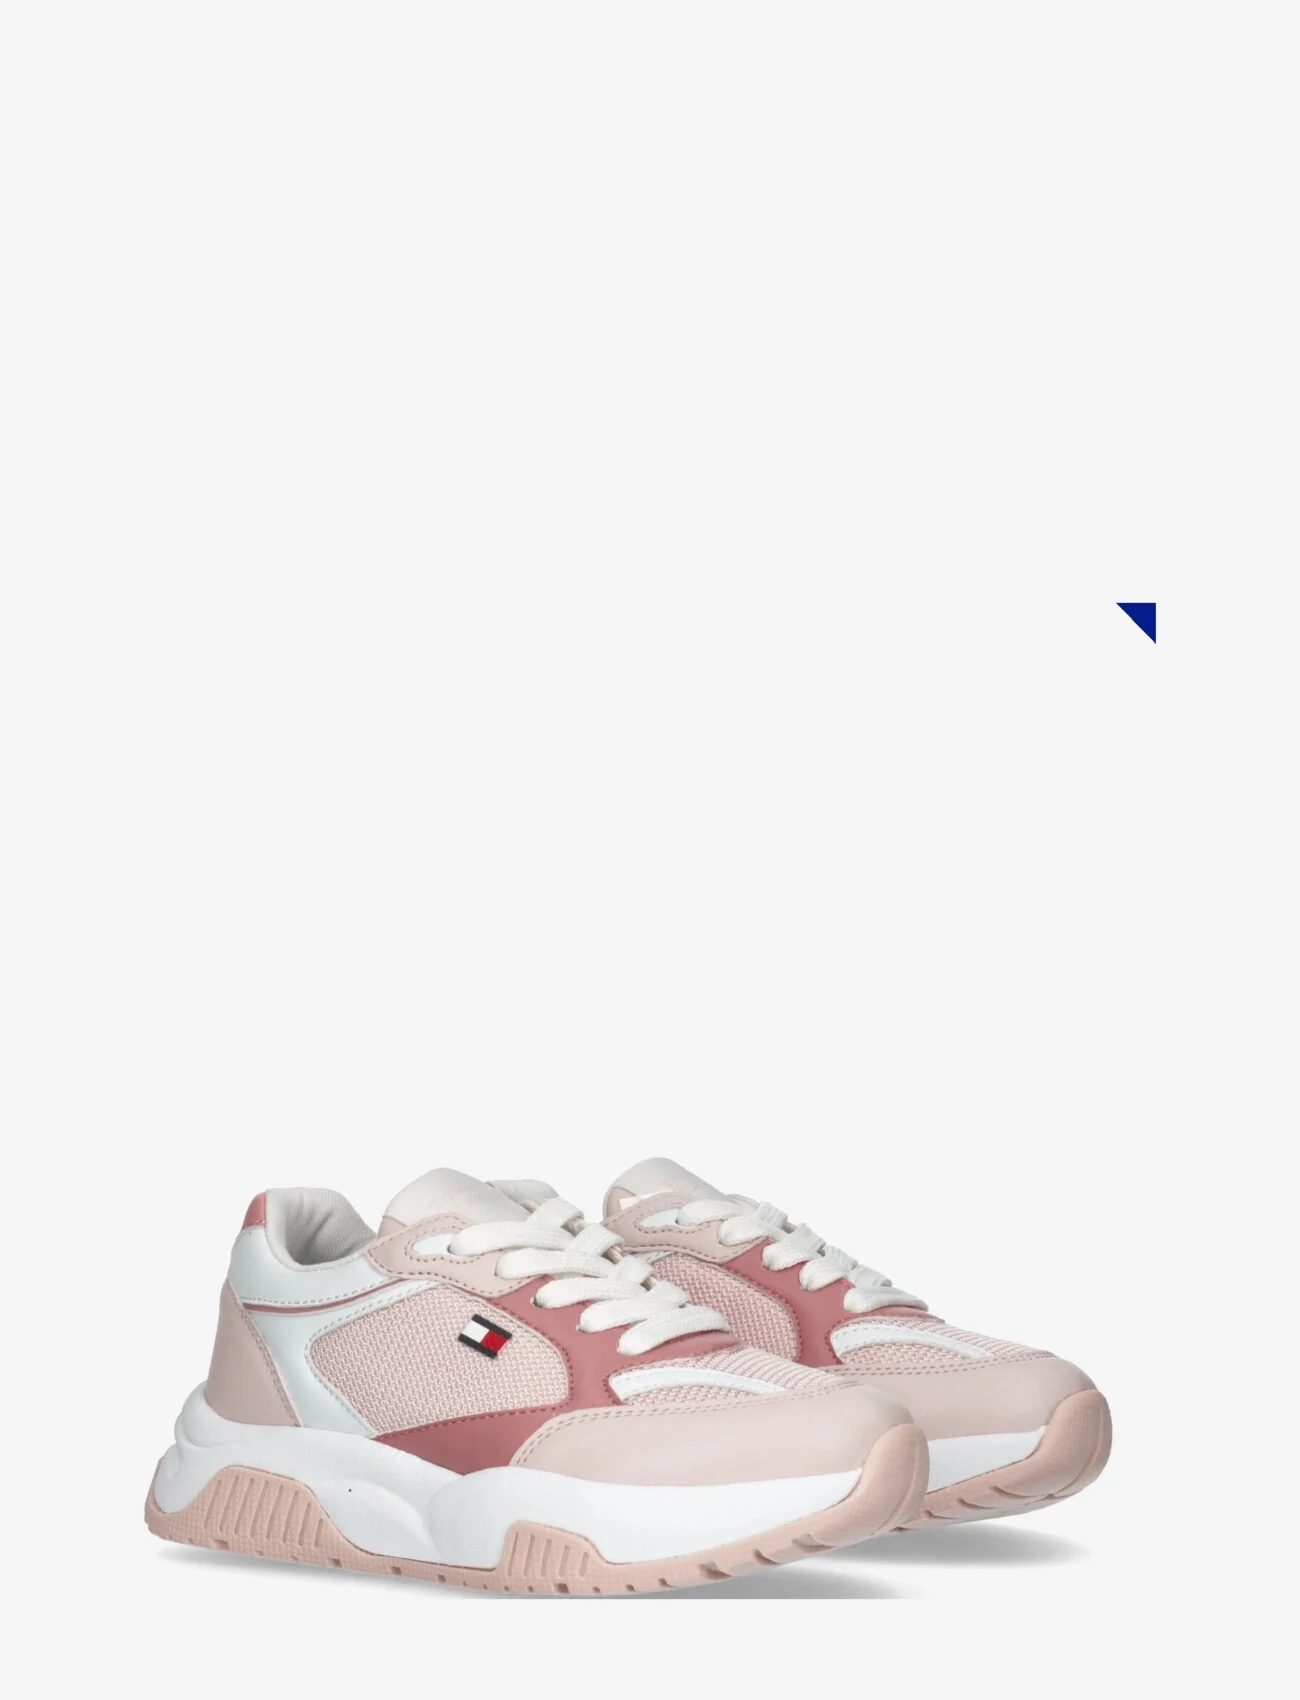 Tommy Hilfiger - LOW CUT LACE-UP SNEAKER - vasaros pasiūlymai - pink/white - 0